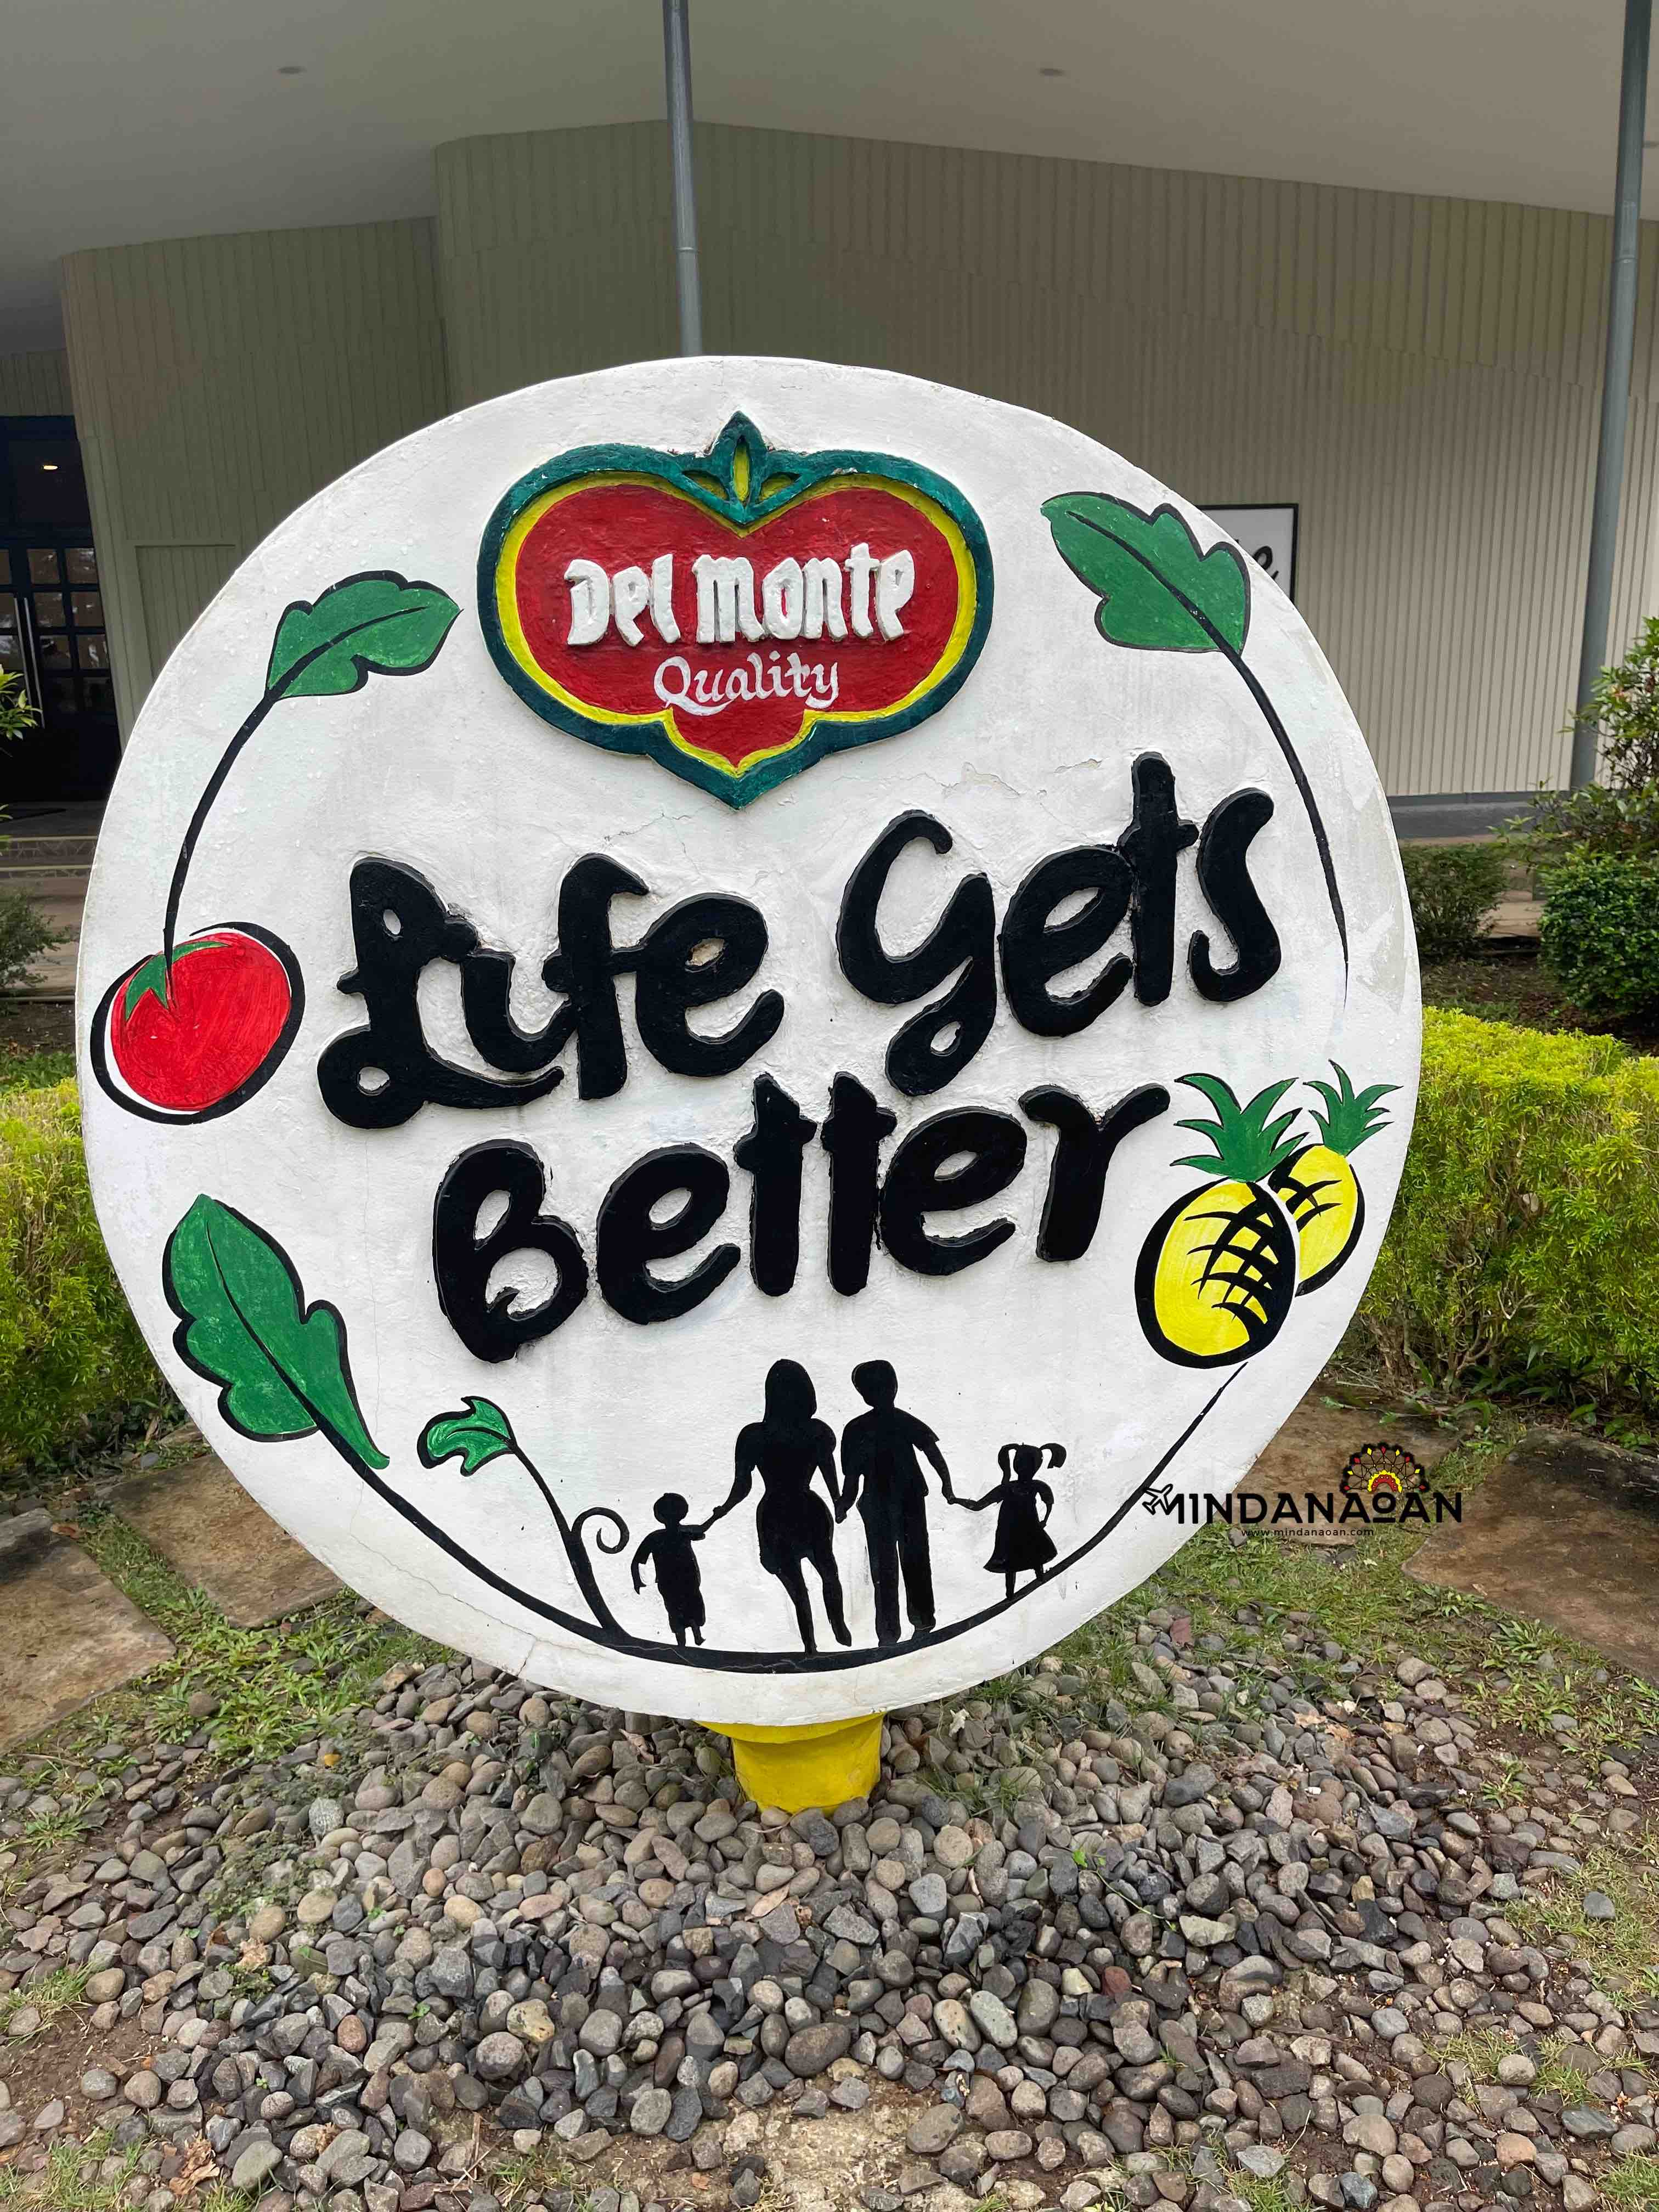 They're back! What to eat at Del Monte Golf Clubhouse Bukidnon (menu inside)